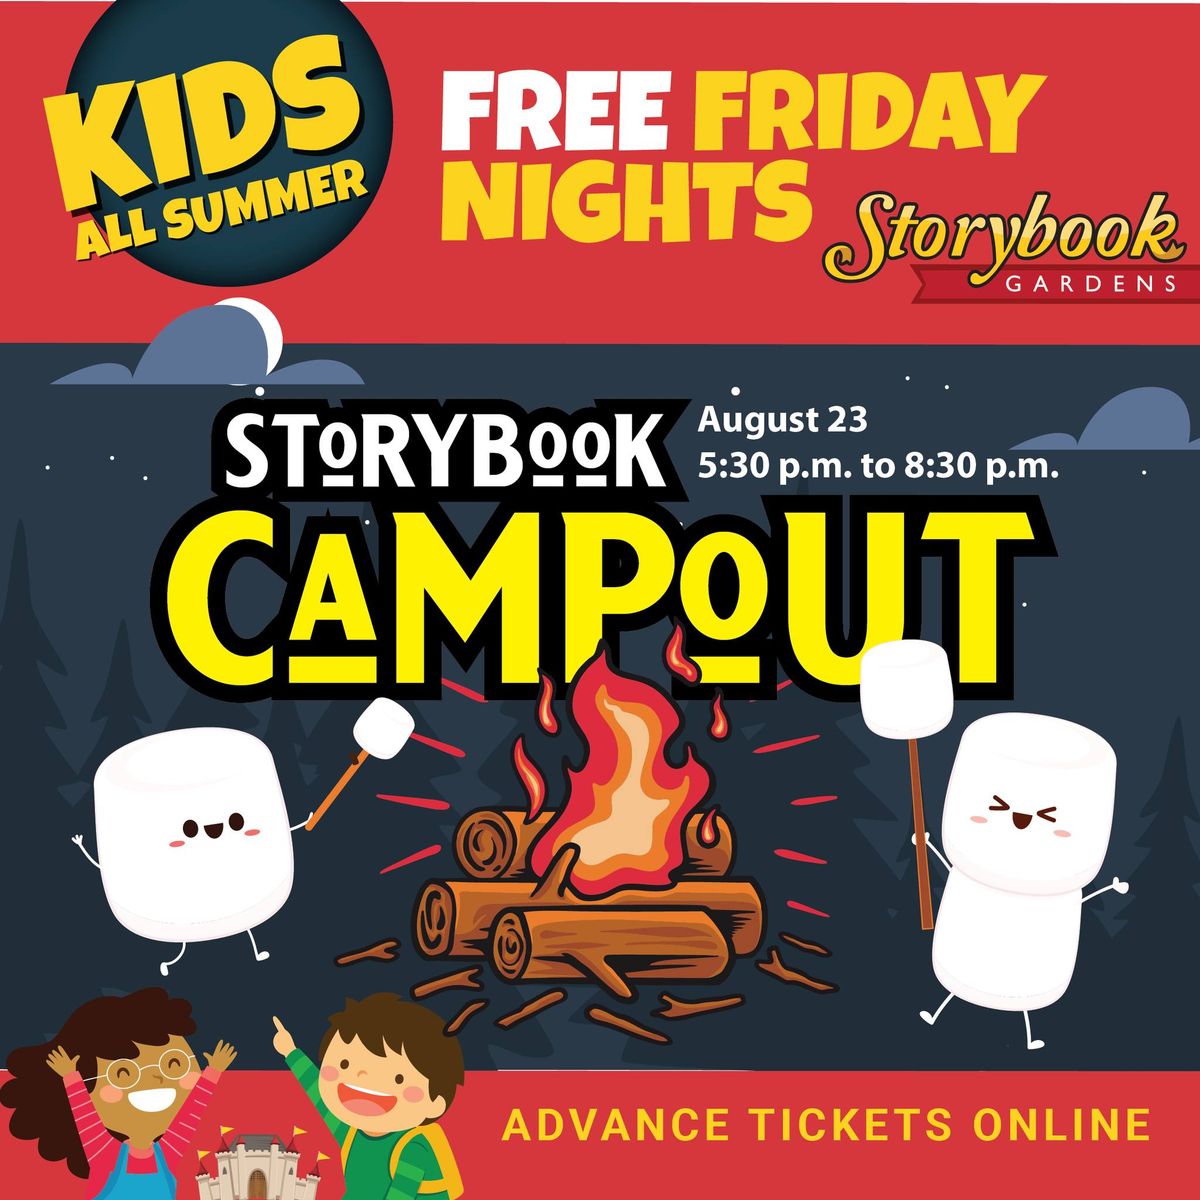 Storybook Free Festival Friday - August 23